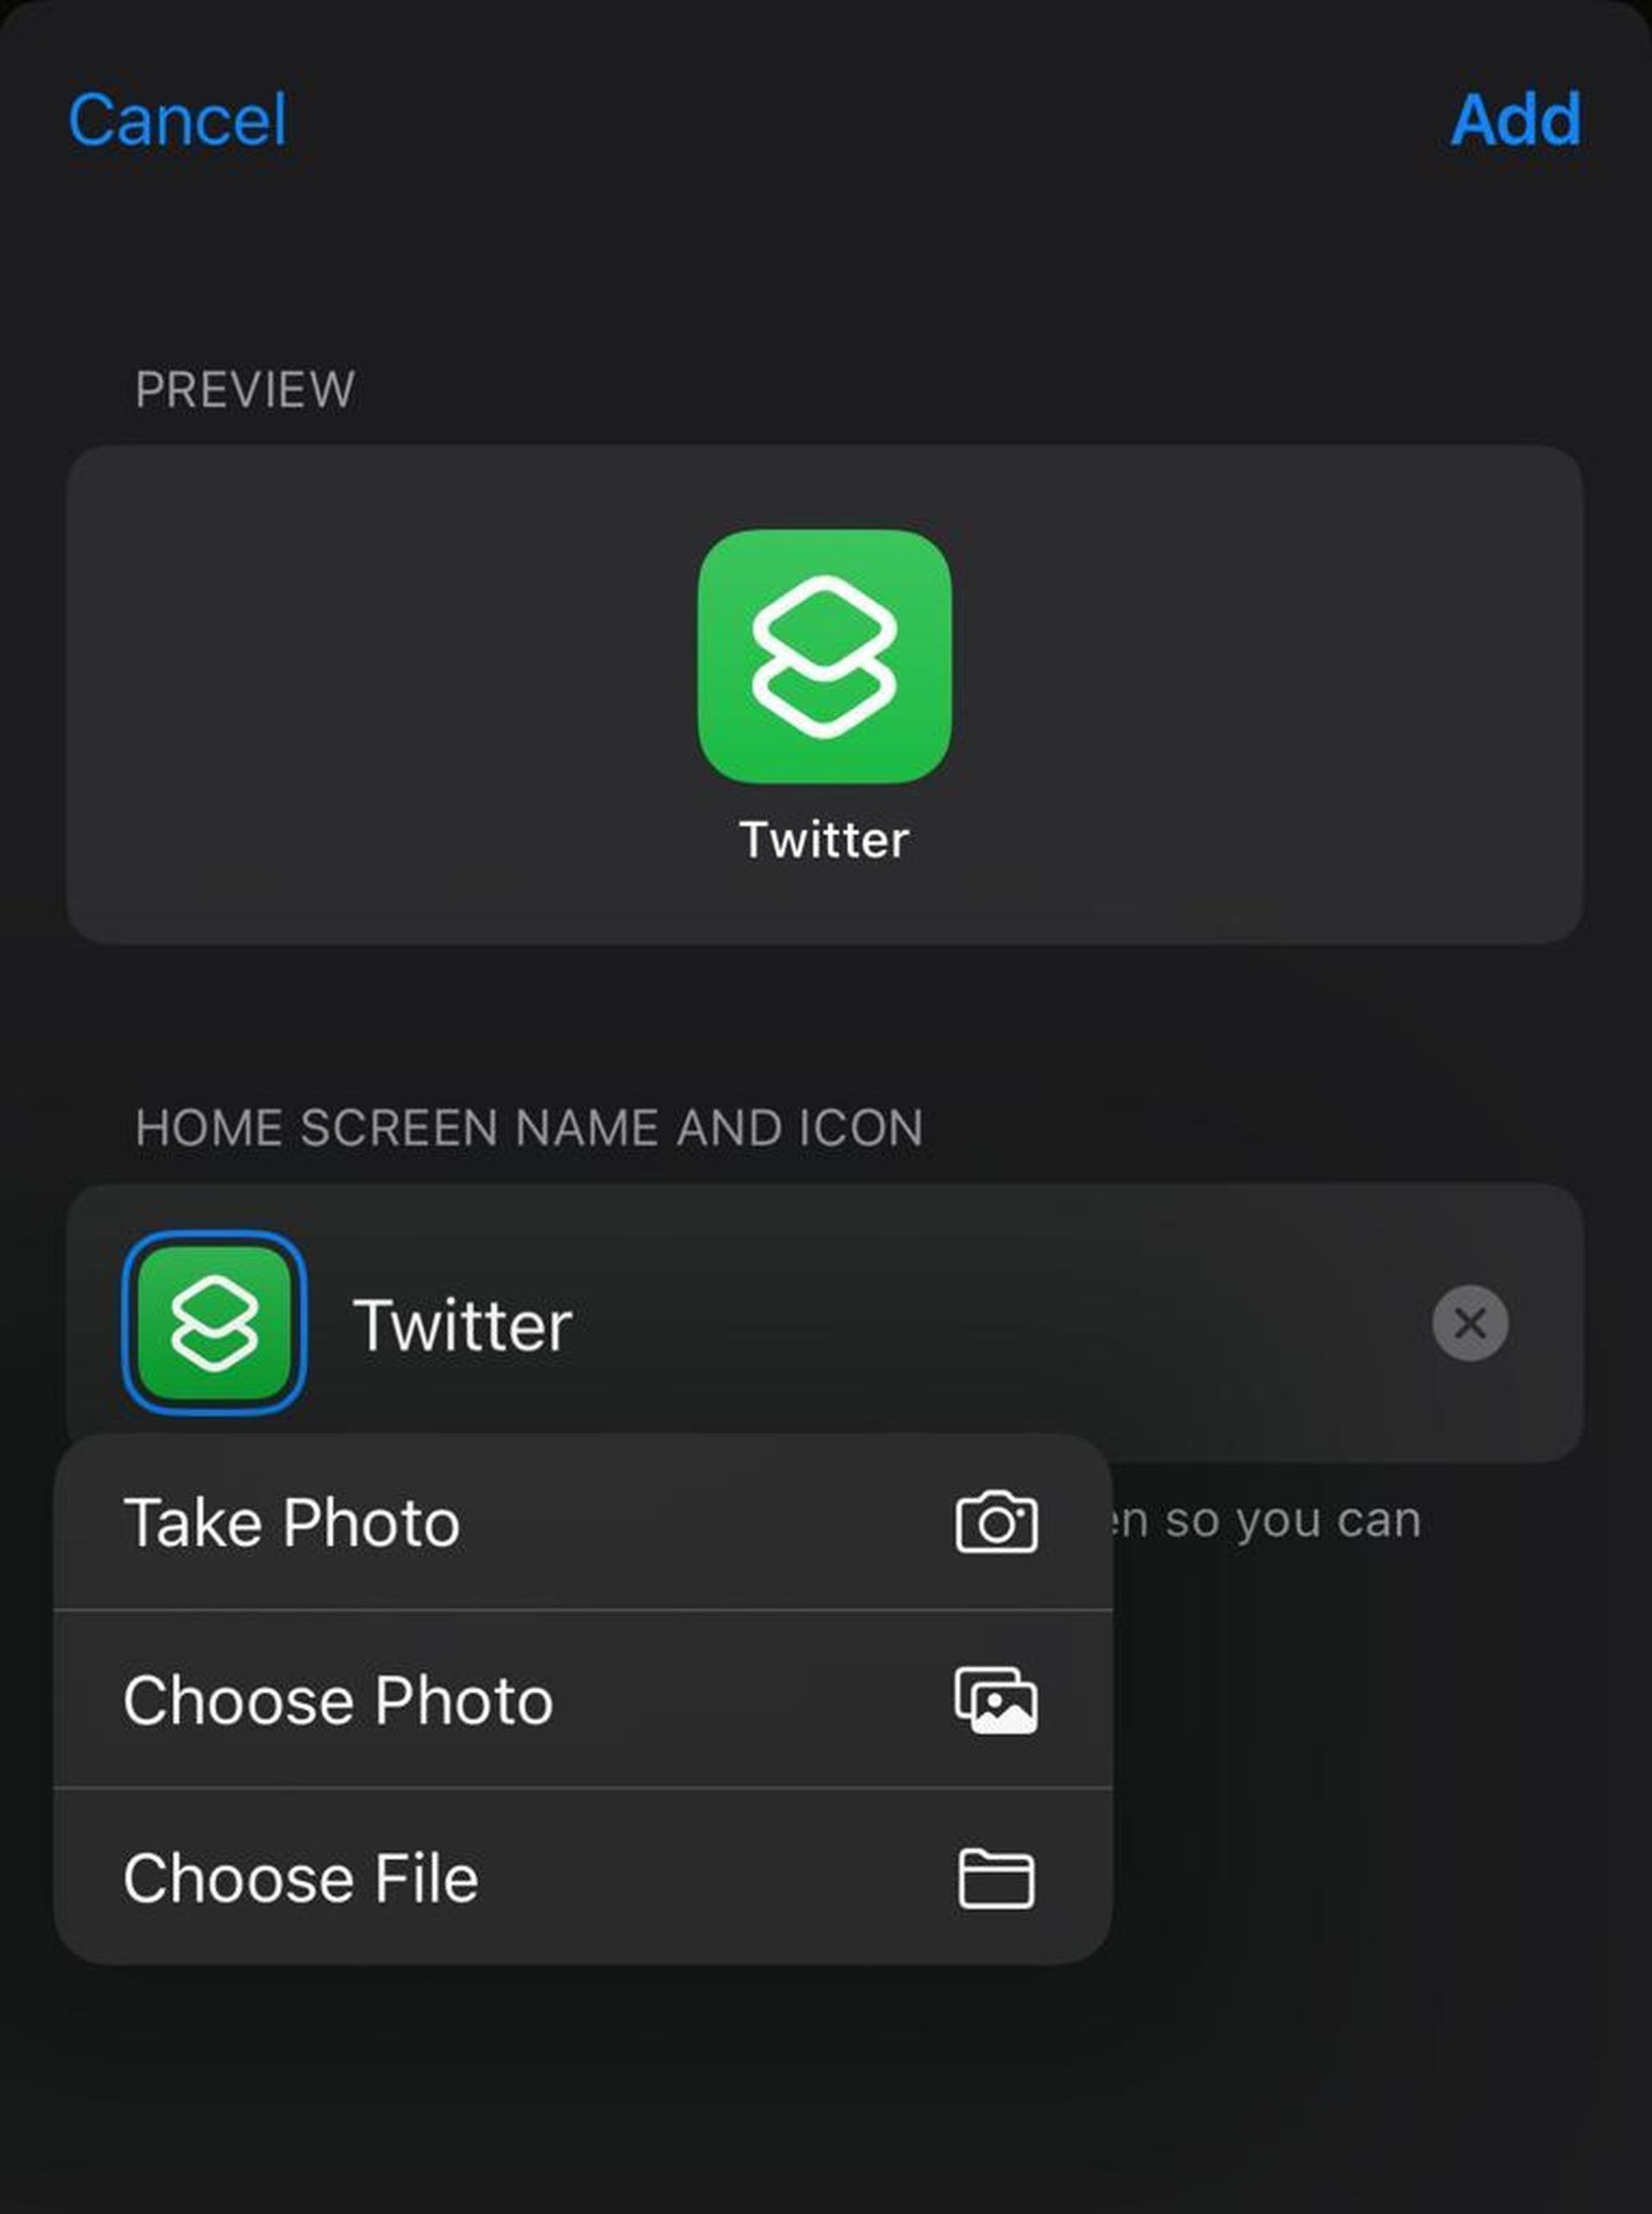 With this article, you can learn how to change Twitter app icon easily on iOS. Keeo reading and explore how to deny Musk's Twitter rebranding!